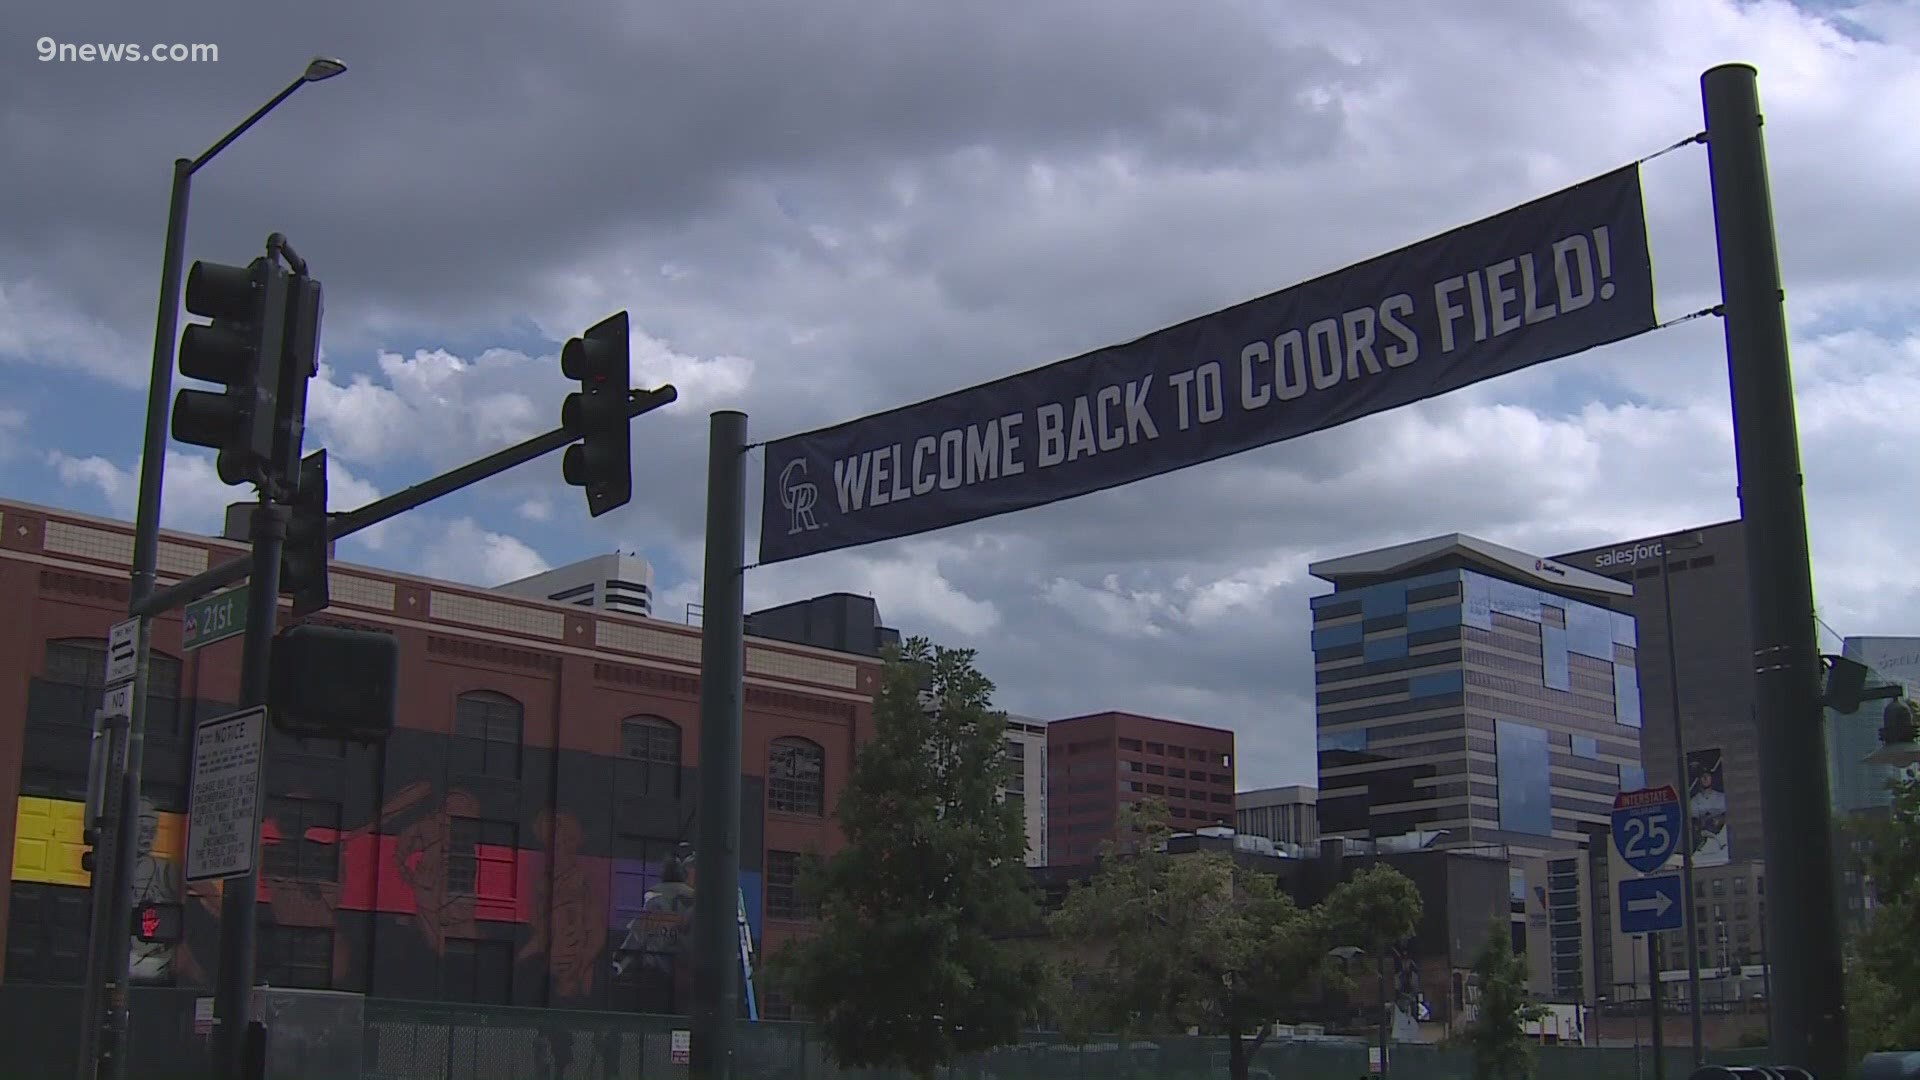 Baseball fans poured into Coors Field and LoDo to celebrate the All-Star Game week – 9NEWS spoke to a man attending his 19th All-Star game.